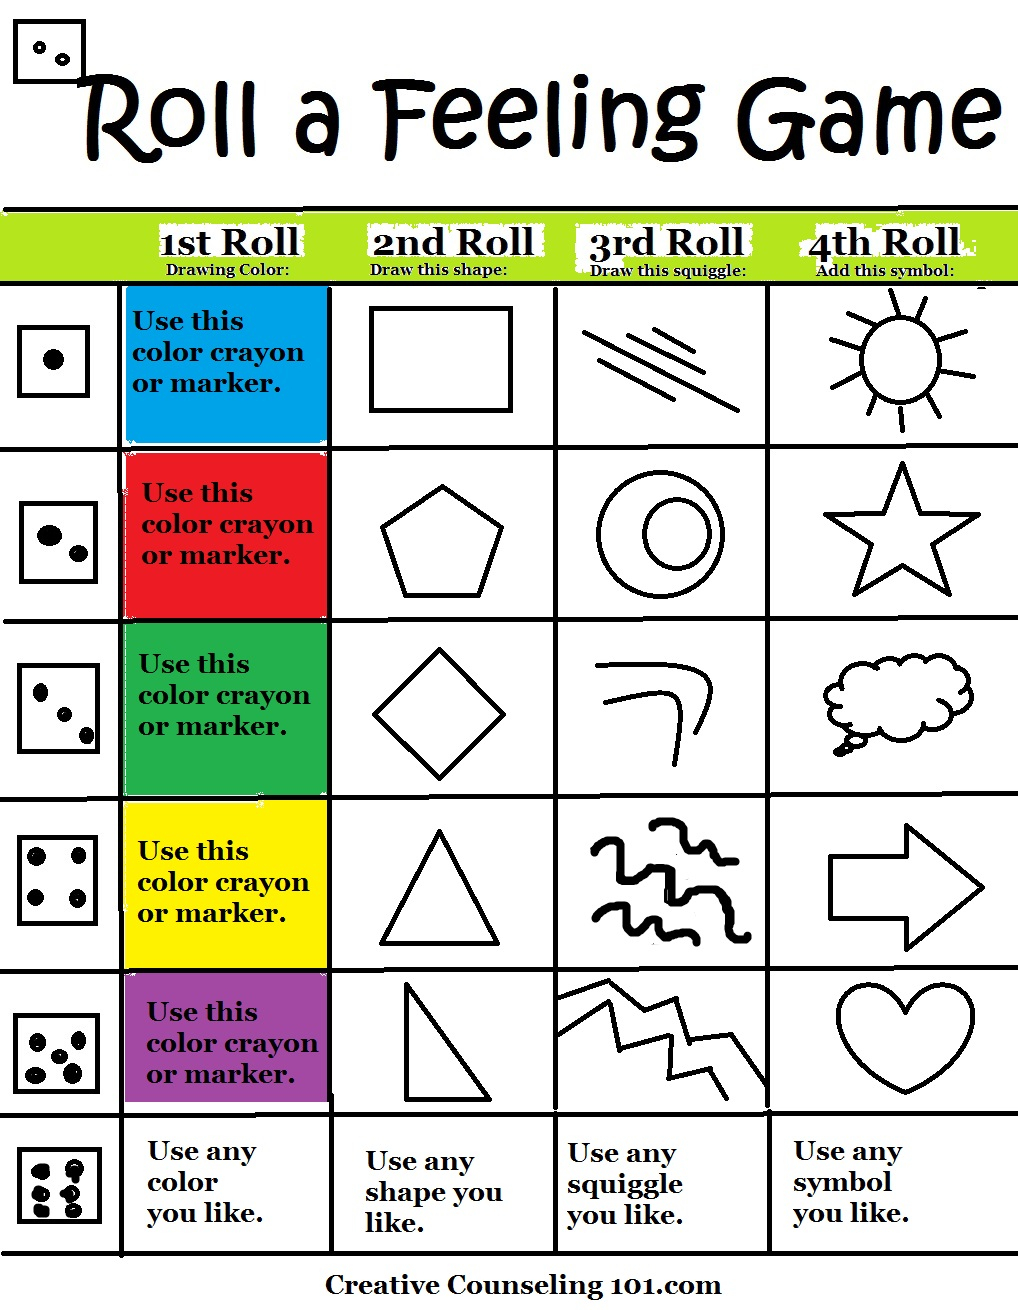 Beyond Art Therapy Roll-A-Feelings Game